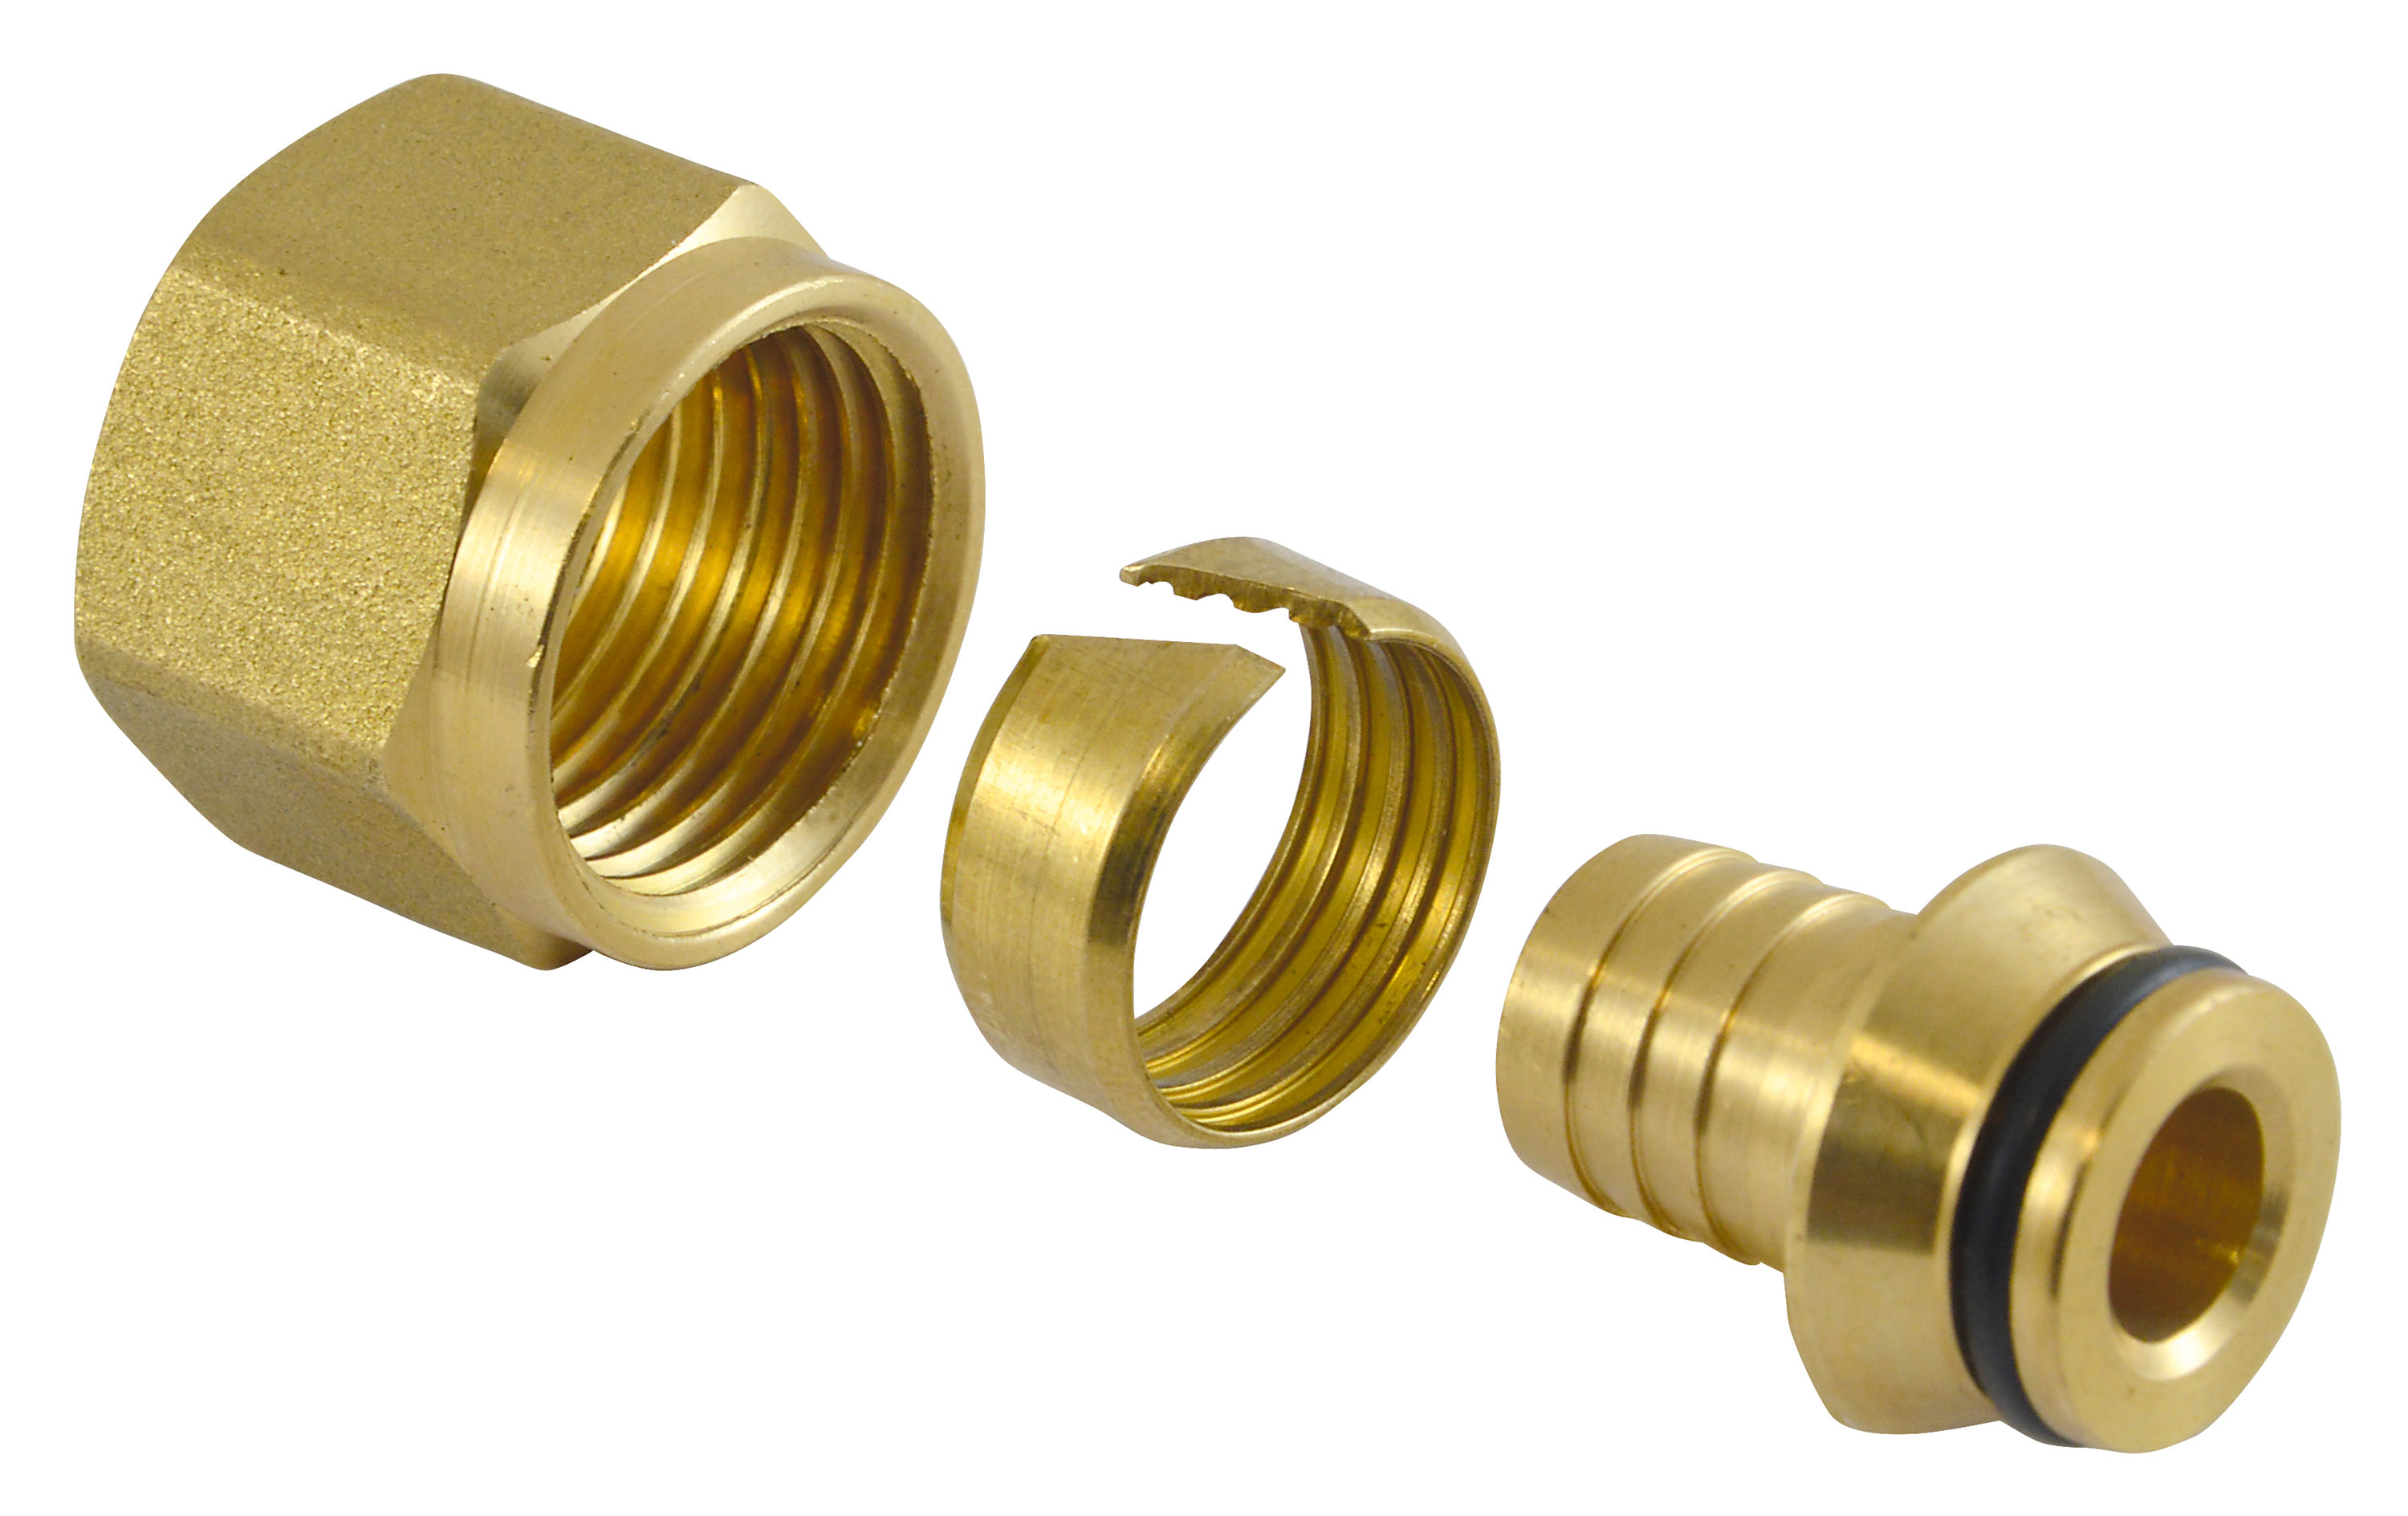 1/2” threaded compression fitting for 16 x 2 mm homogeneous plastic pipes